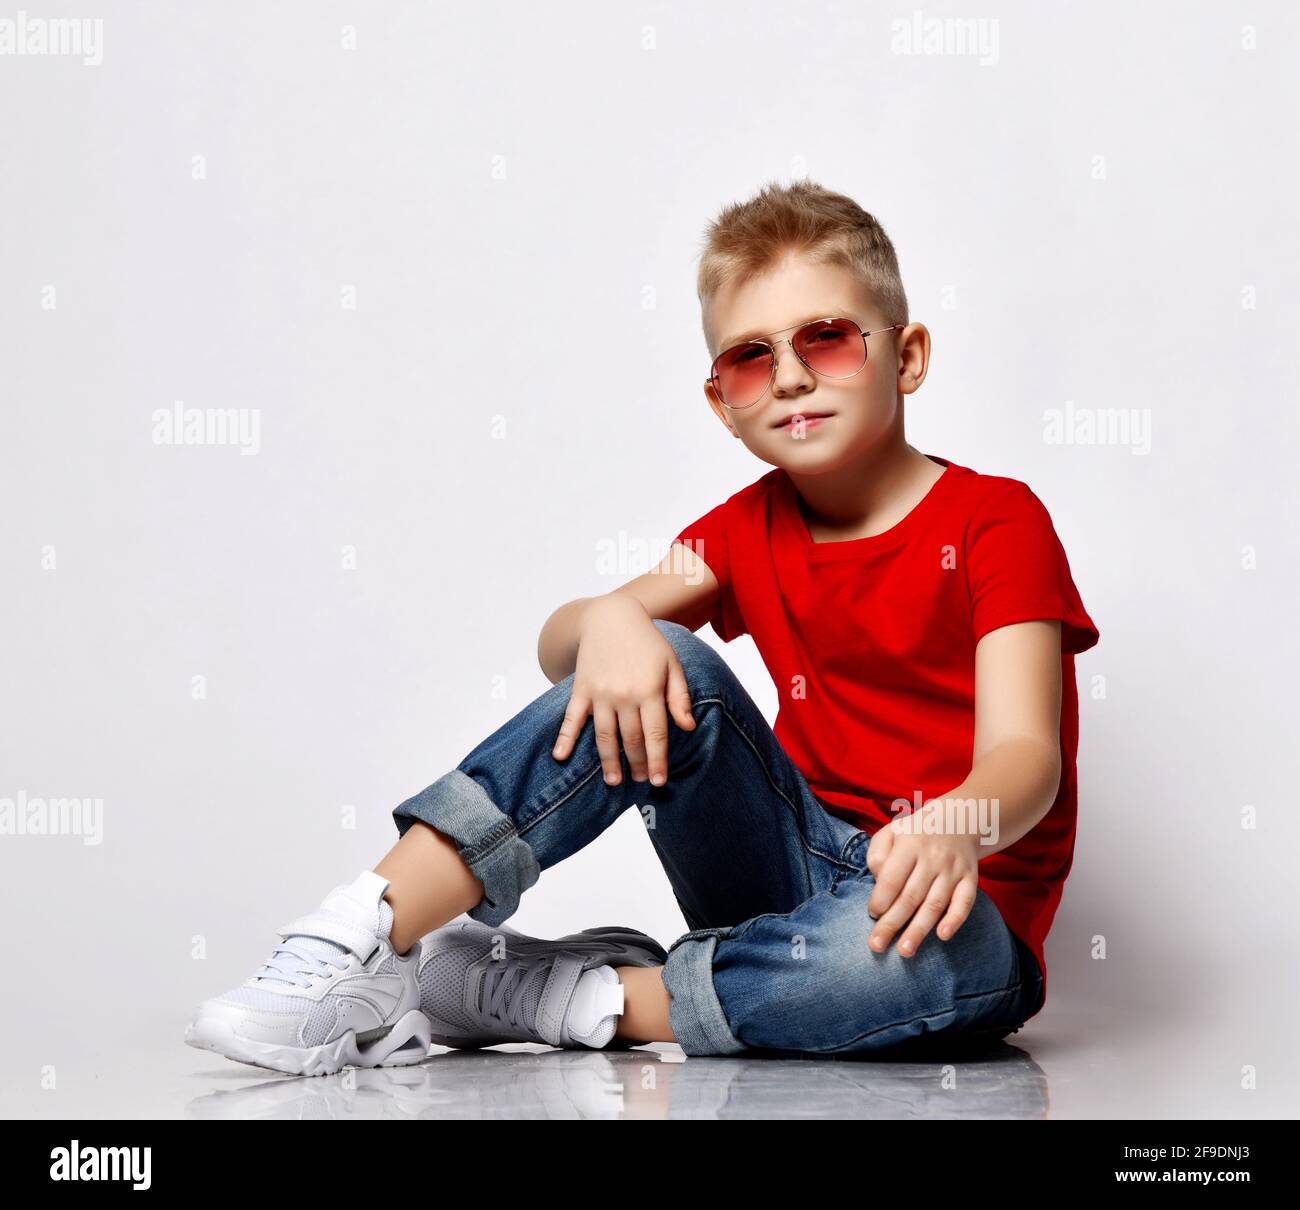 Cool blonde kid boy leader in red t-shirt, blue jeans, white sneakers and sunglasses sits on floor in relaxed pose Stock Photo